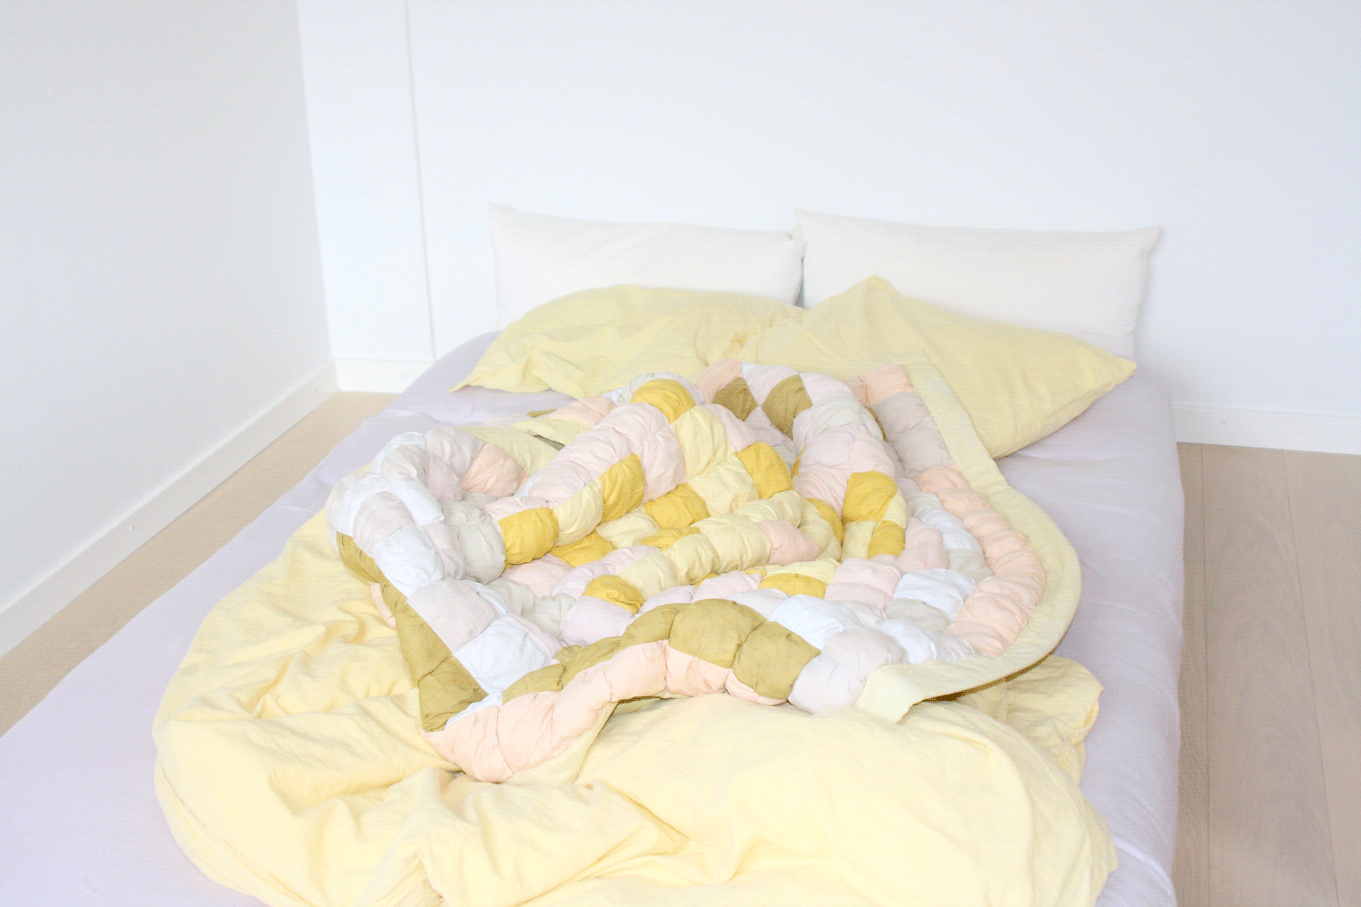 A puffy quilt lays on a messy bed. The quilt has pale tones
                of yellows, greens, and pinks.